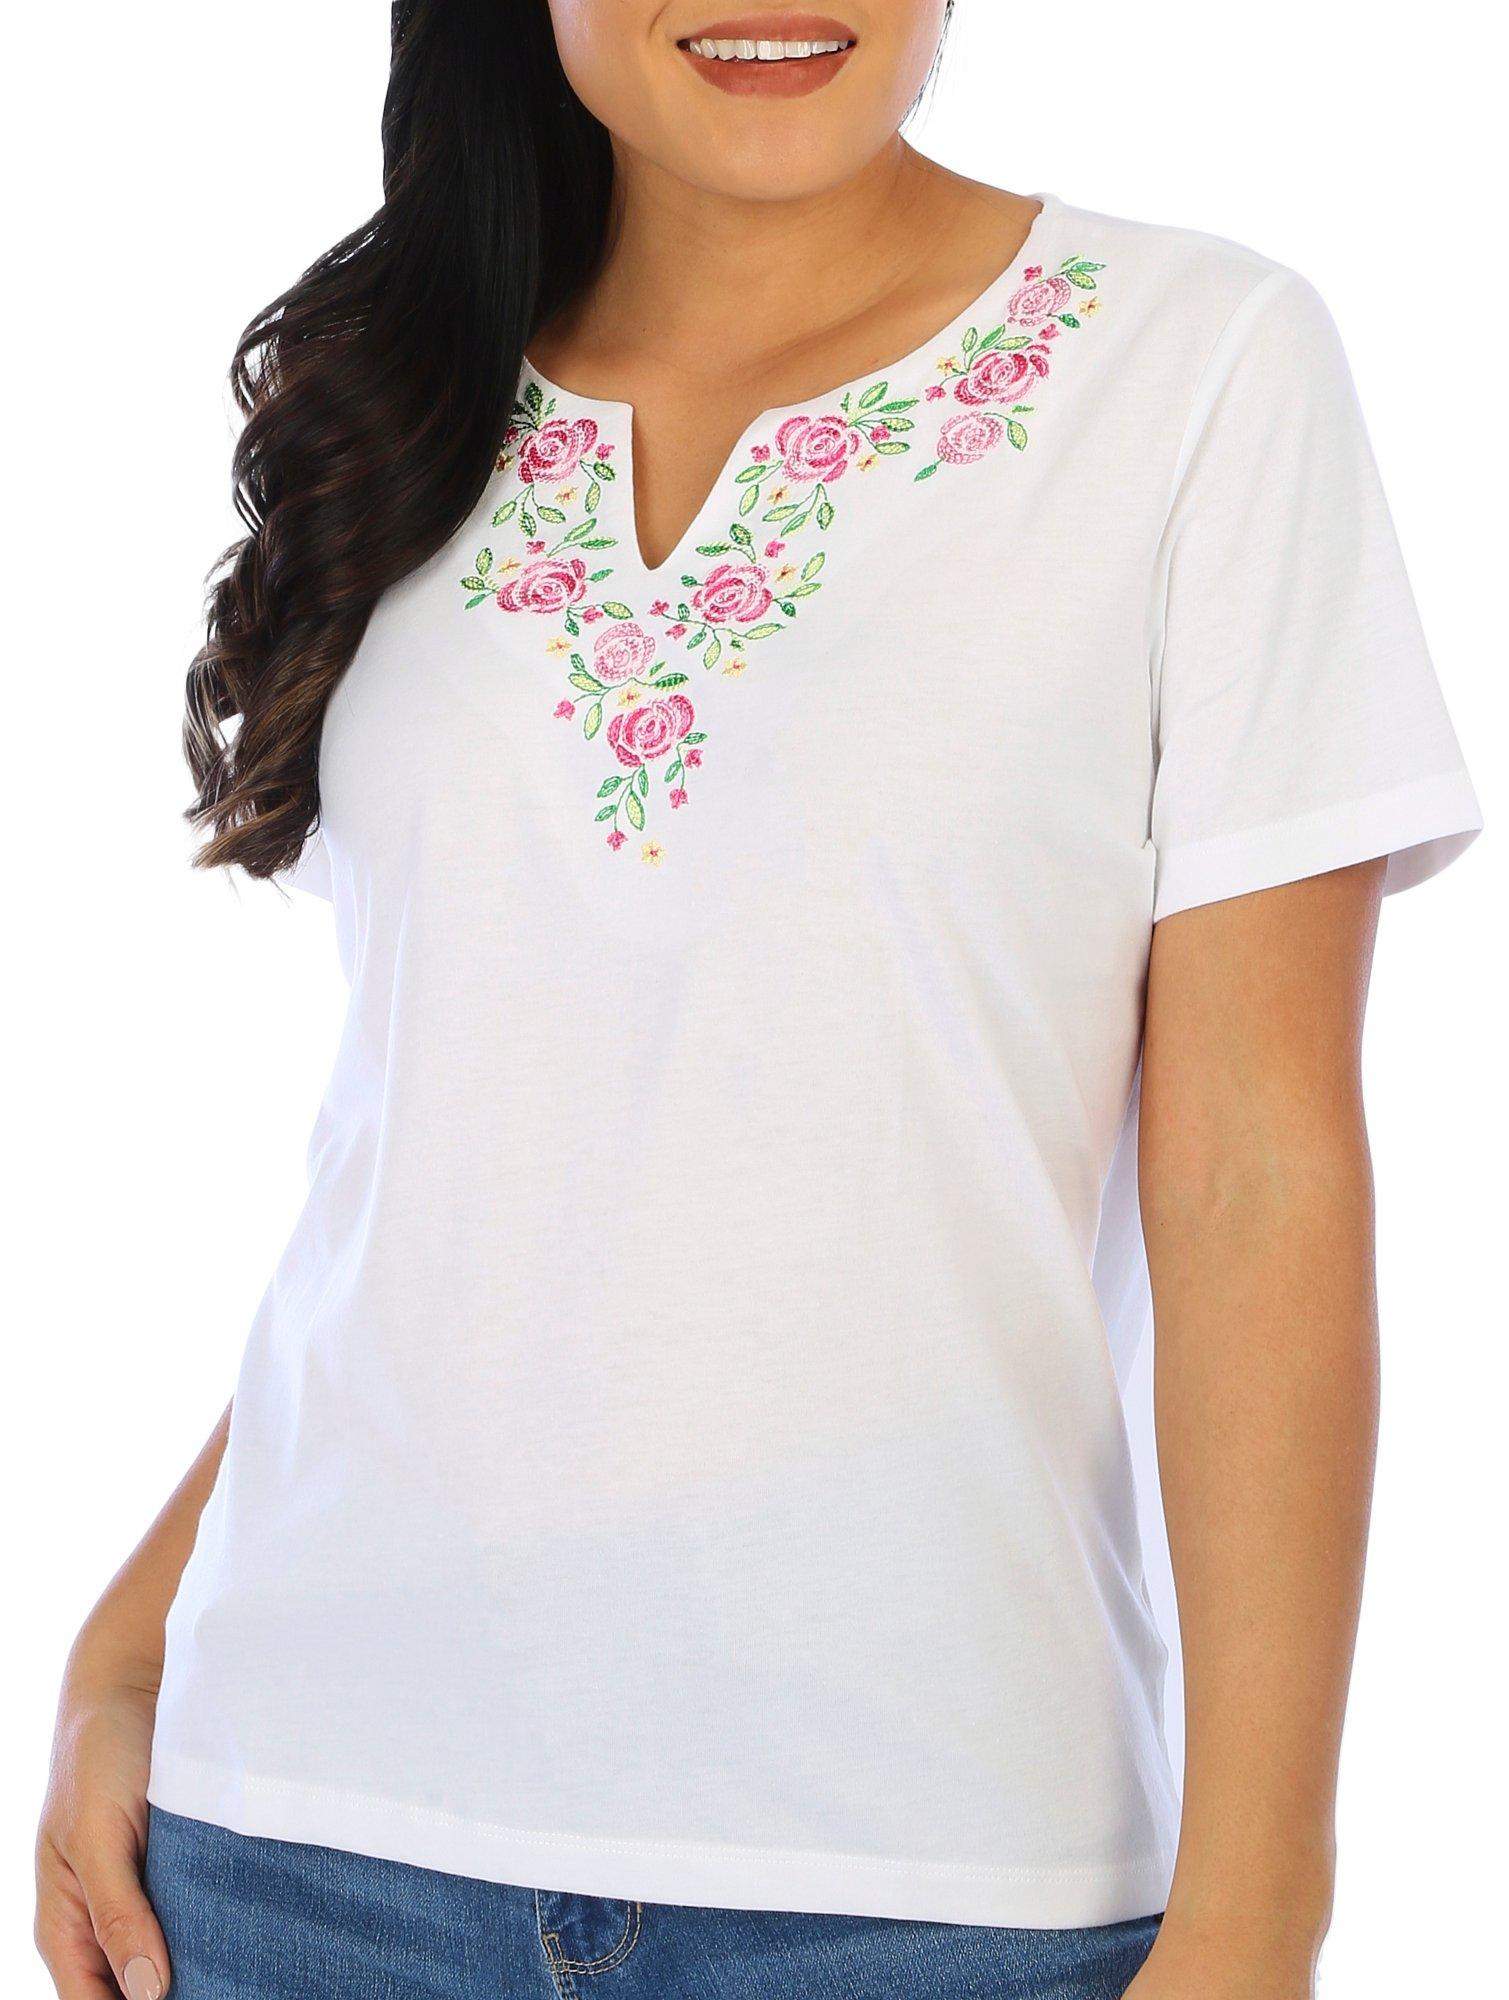 Coral Bay Petite Solid Floral Embroidery Short Sleeve Top